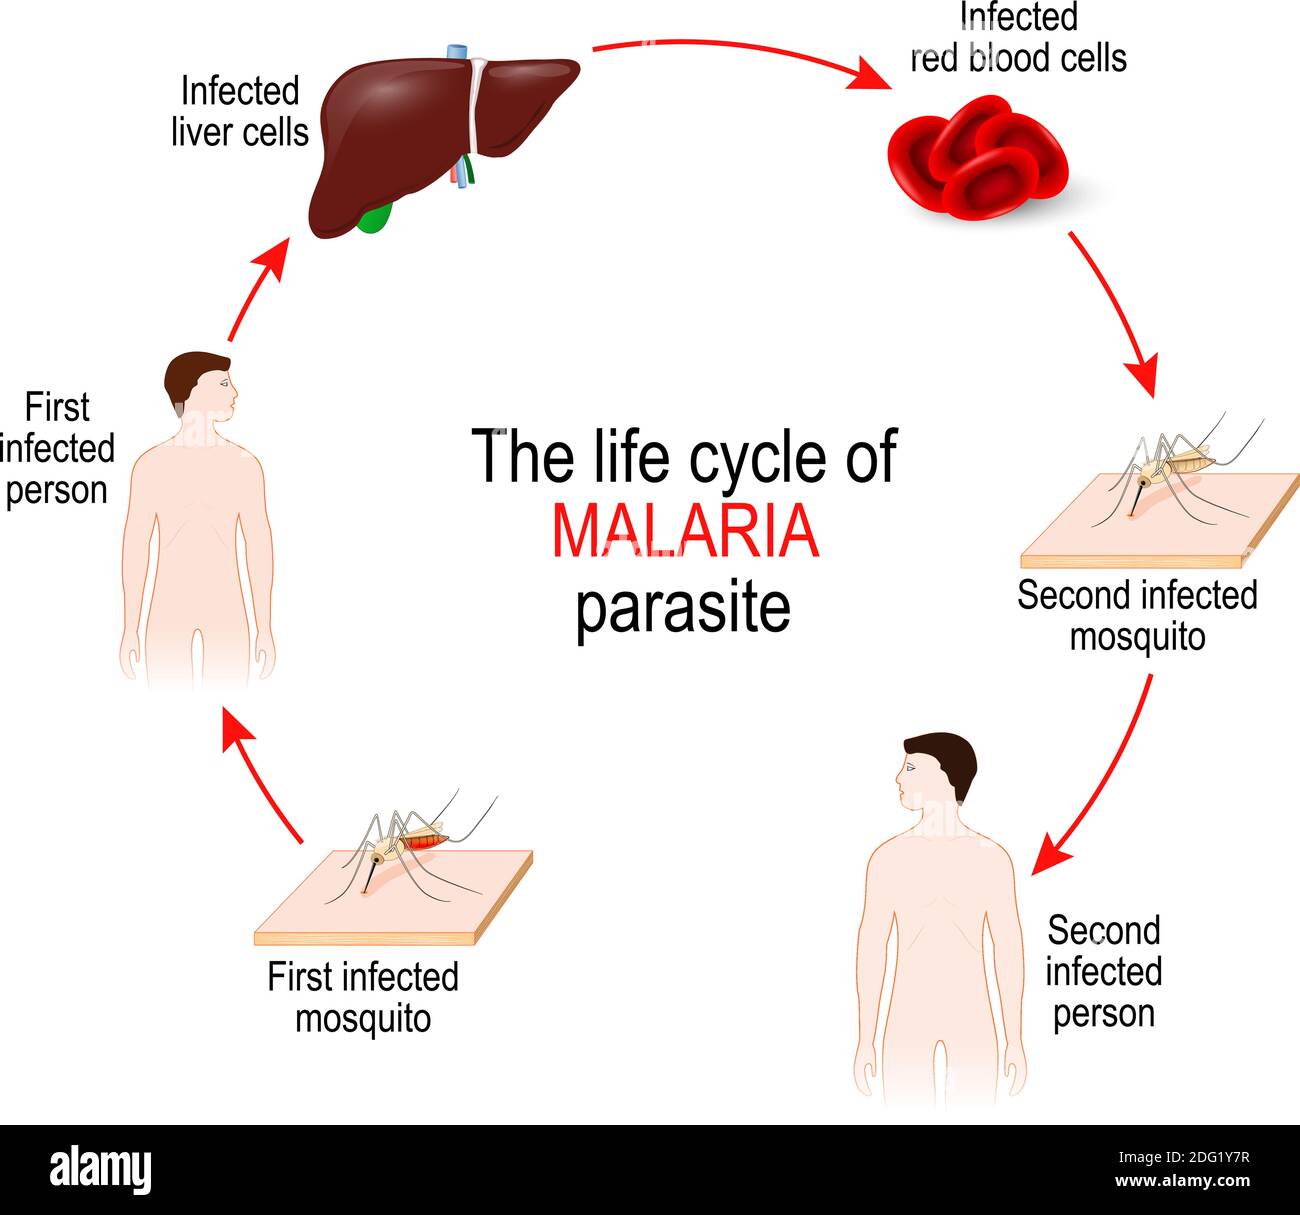 life cycle of a malaria parasite (from First infected mosquito to Second infectedperson). Malaria is a disease caused by a parasite Plasmodium Stock Vector